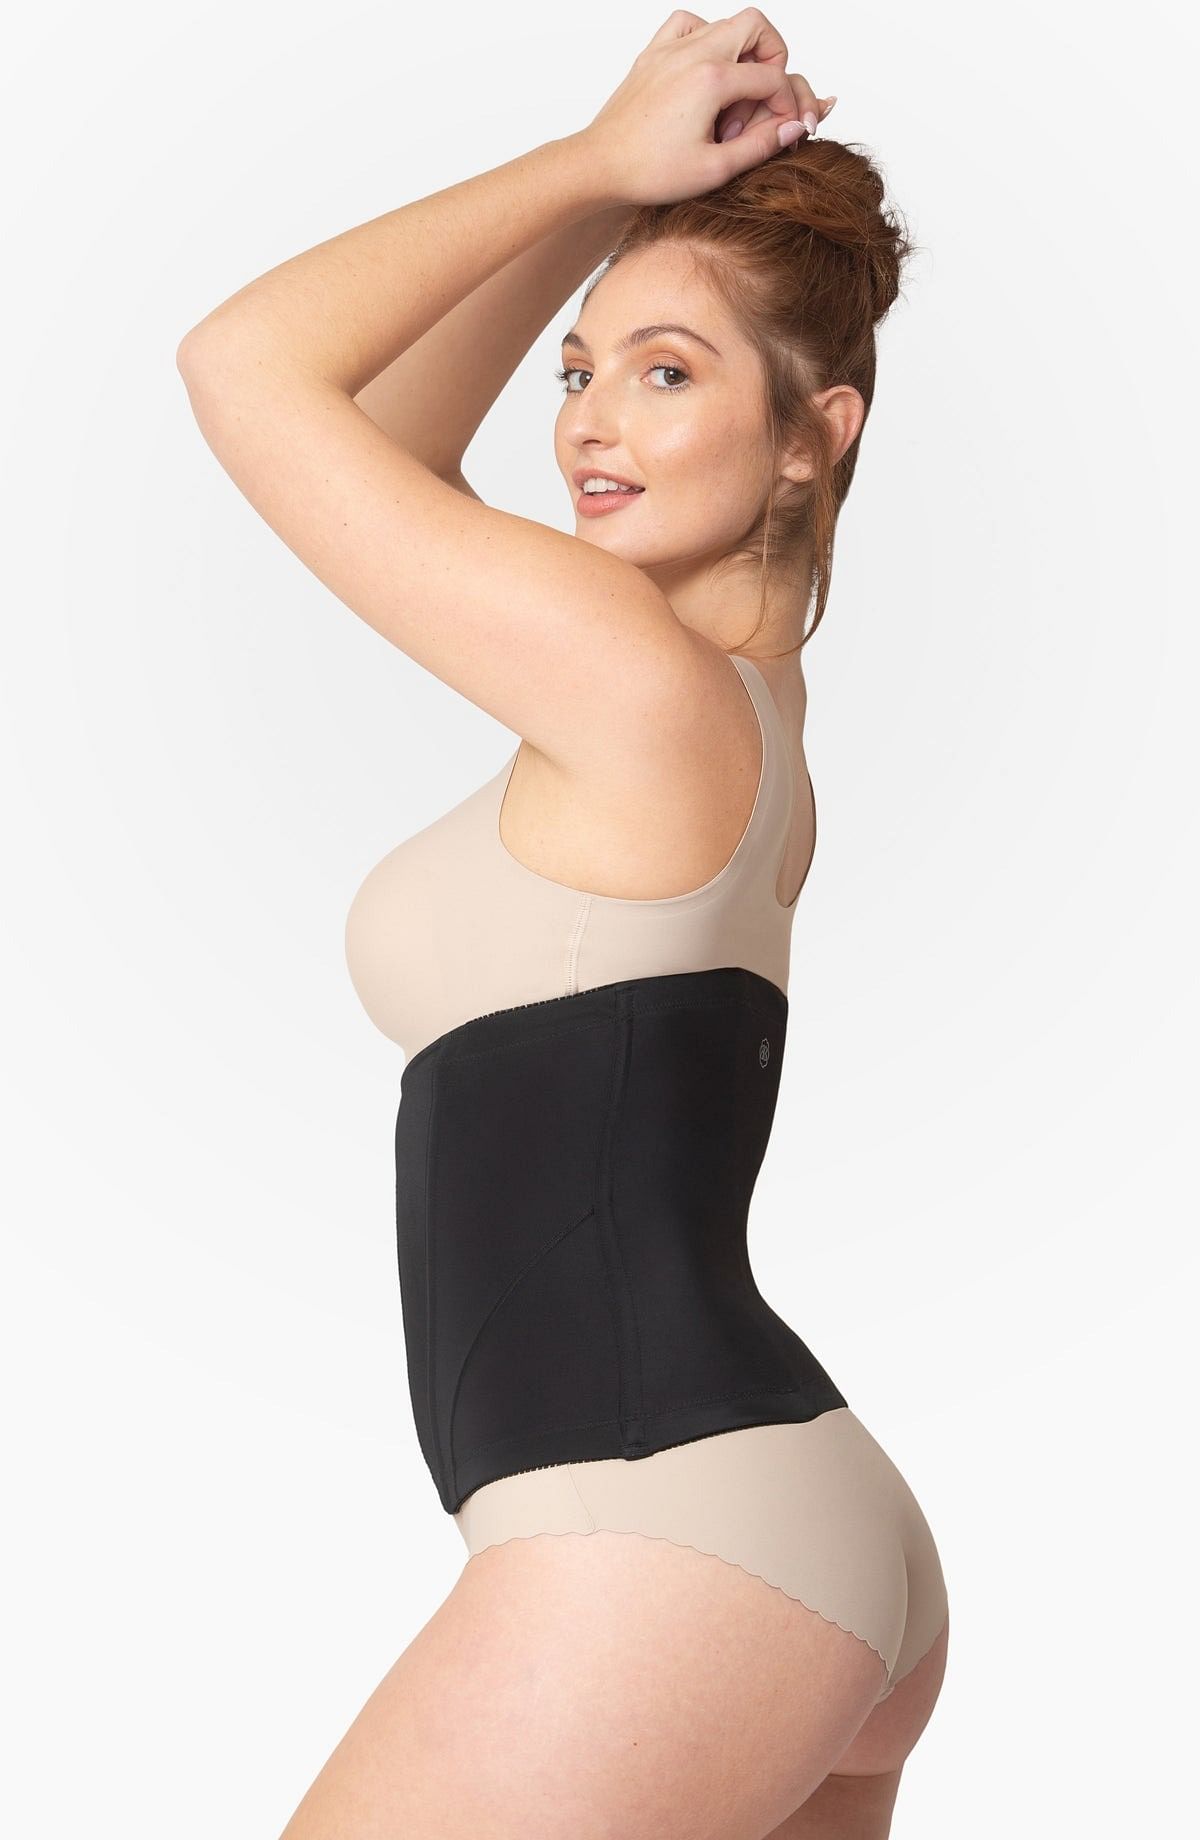 Is Postpartum Shapewear Really Necessary After Childbirth? - The